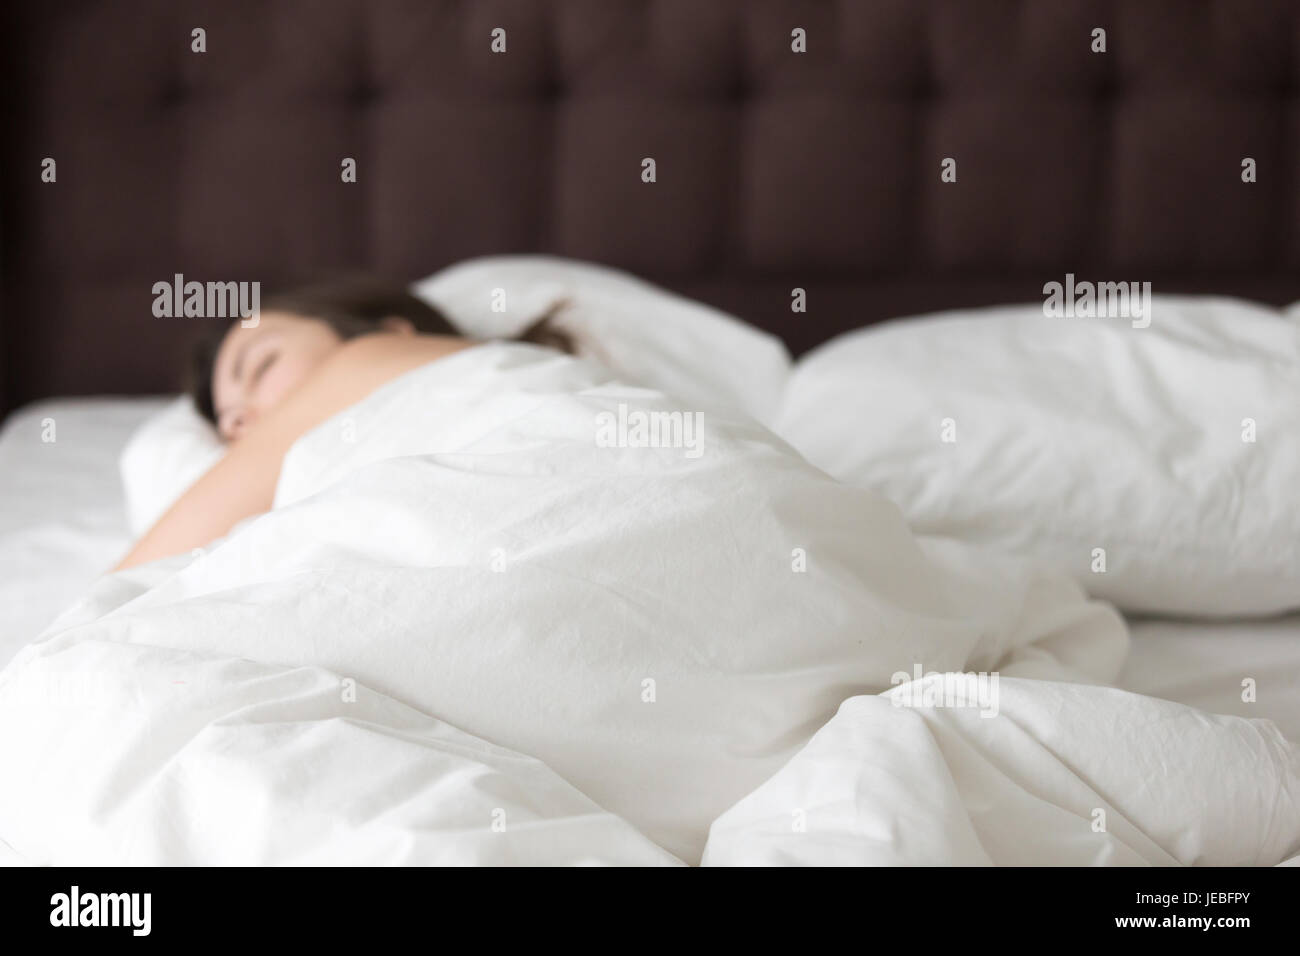 Woman sleeping alone on large double bed Stock Photo